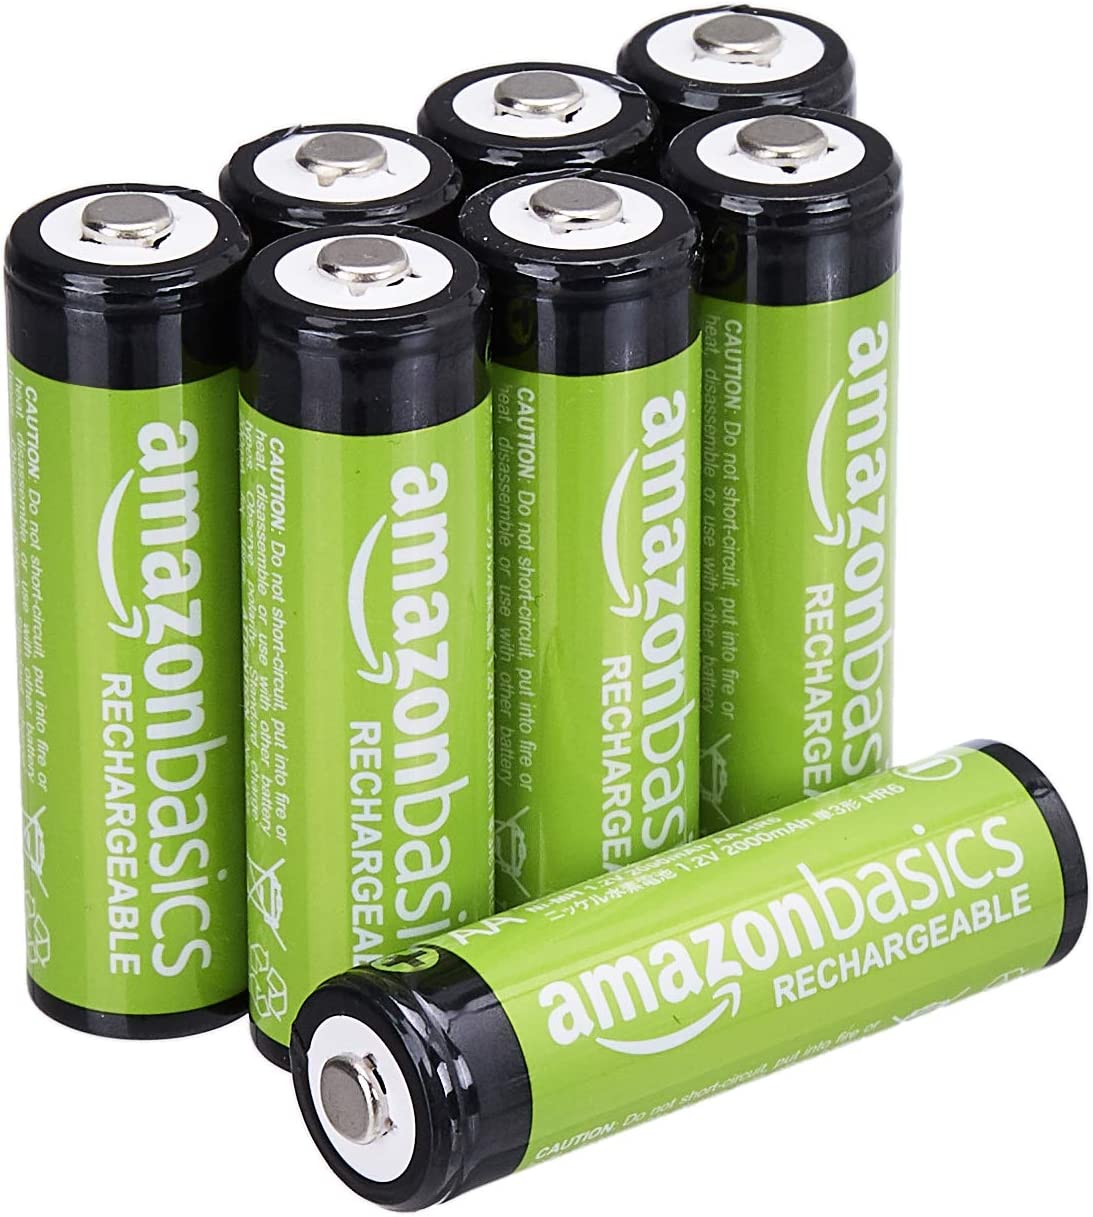 Amazon Basics Pre-Charged NiMH Rechargeable AA Batteries, 8-Pack